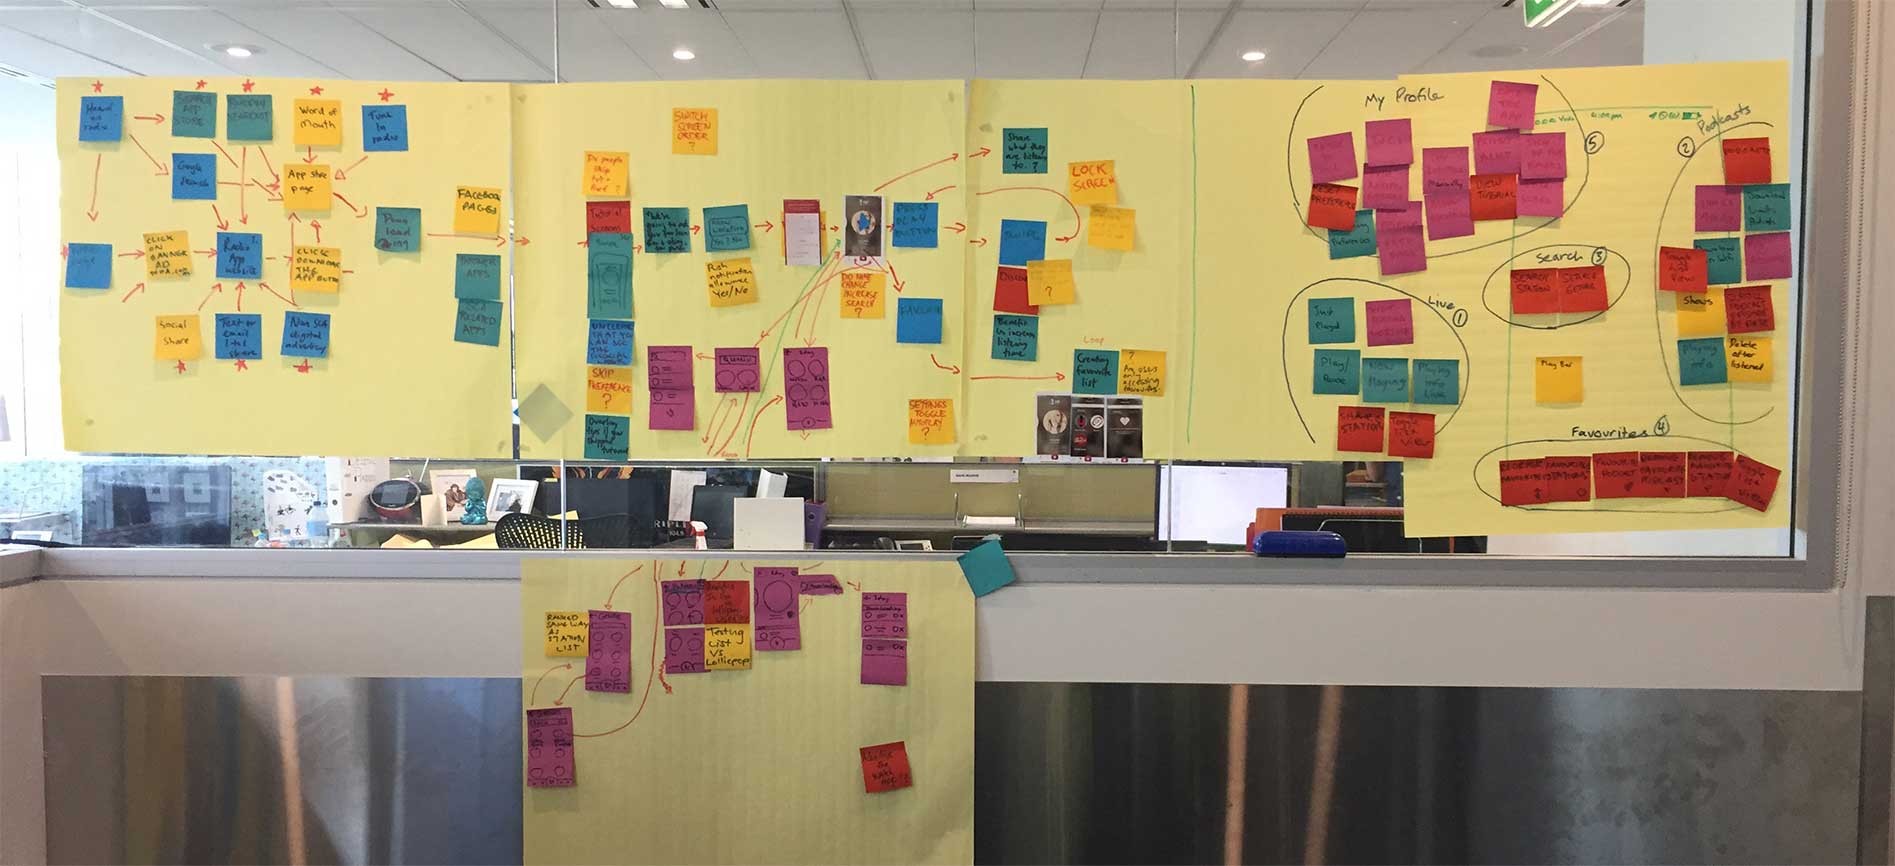 taskflow workshop post-it notes on wall